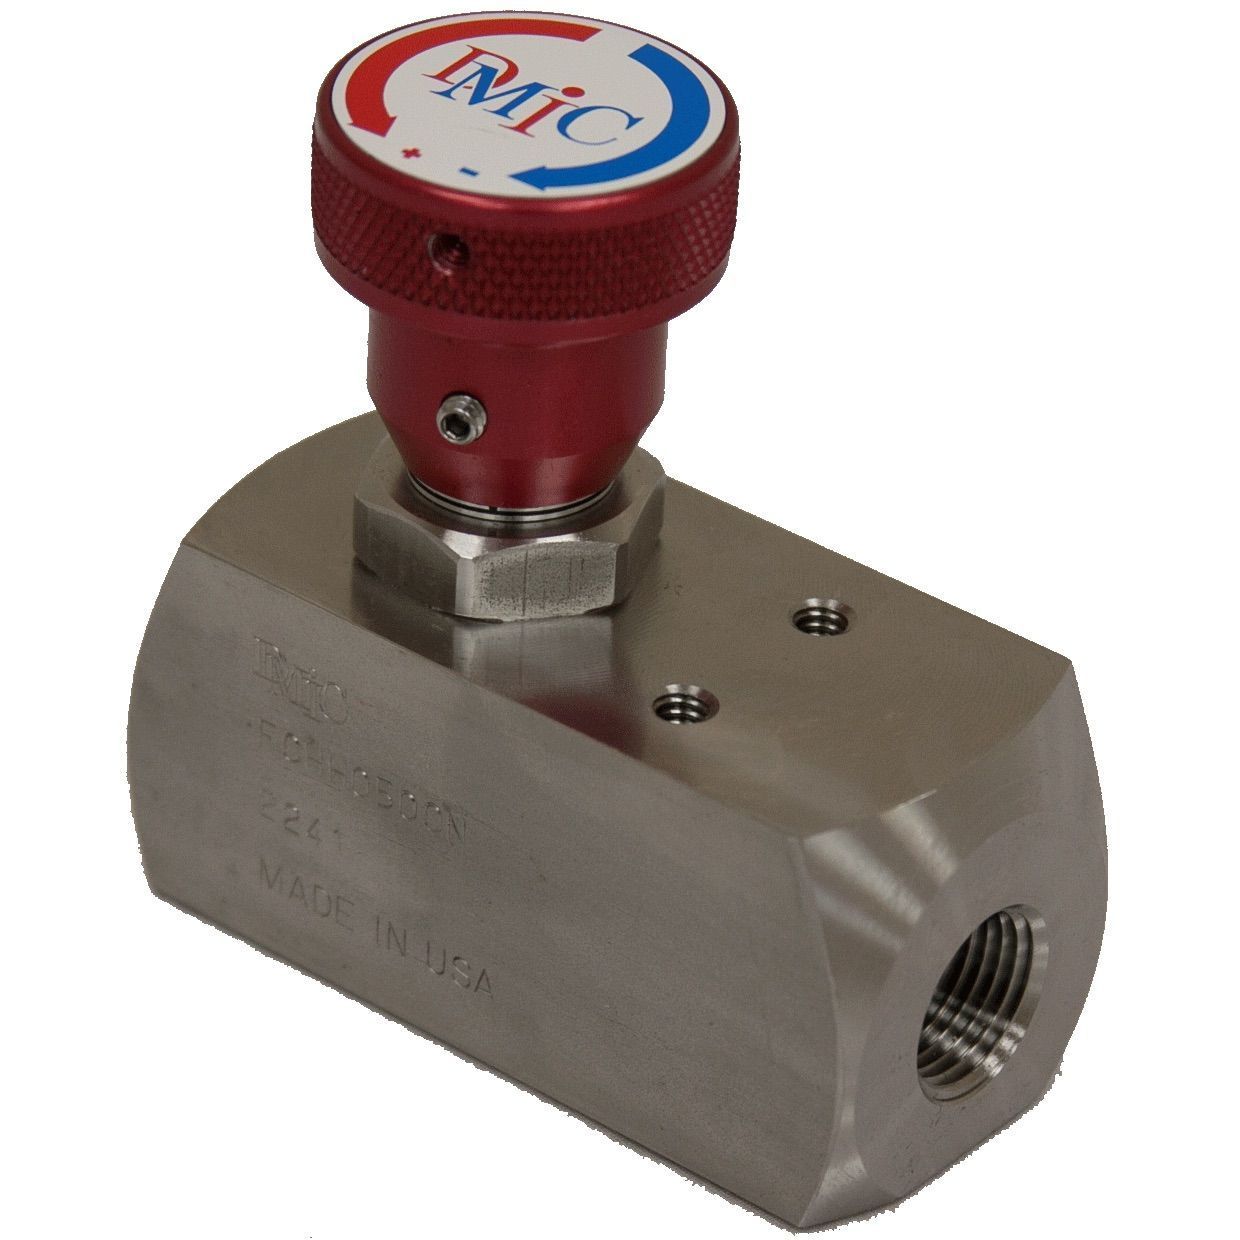 FCHH-1500N-2221 : DMIC Flow Control, Unidirectional, with Integrated Check, 1.5" NPT, 316SS, 10000psi